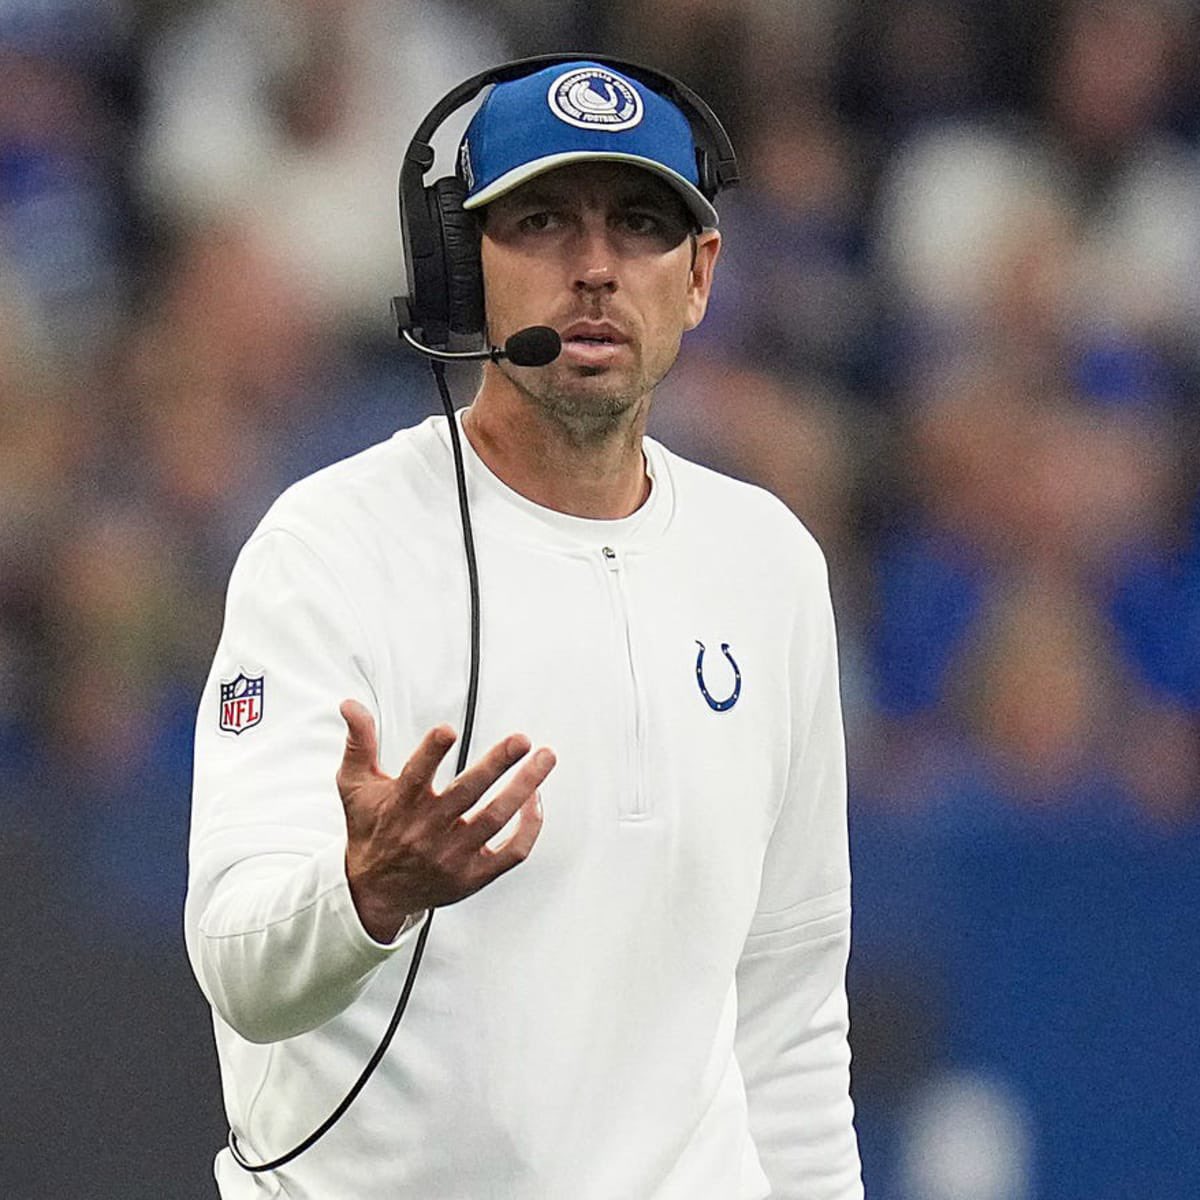 Manifesting a good Week 1 matchup so the Week 1 curse can end🤞 #ForTheShoe